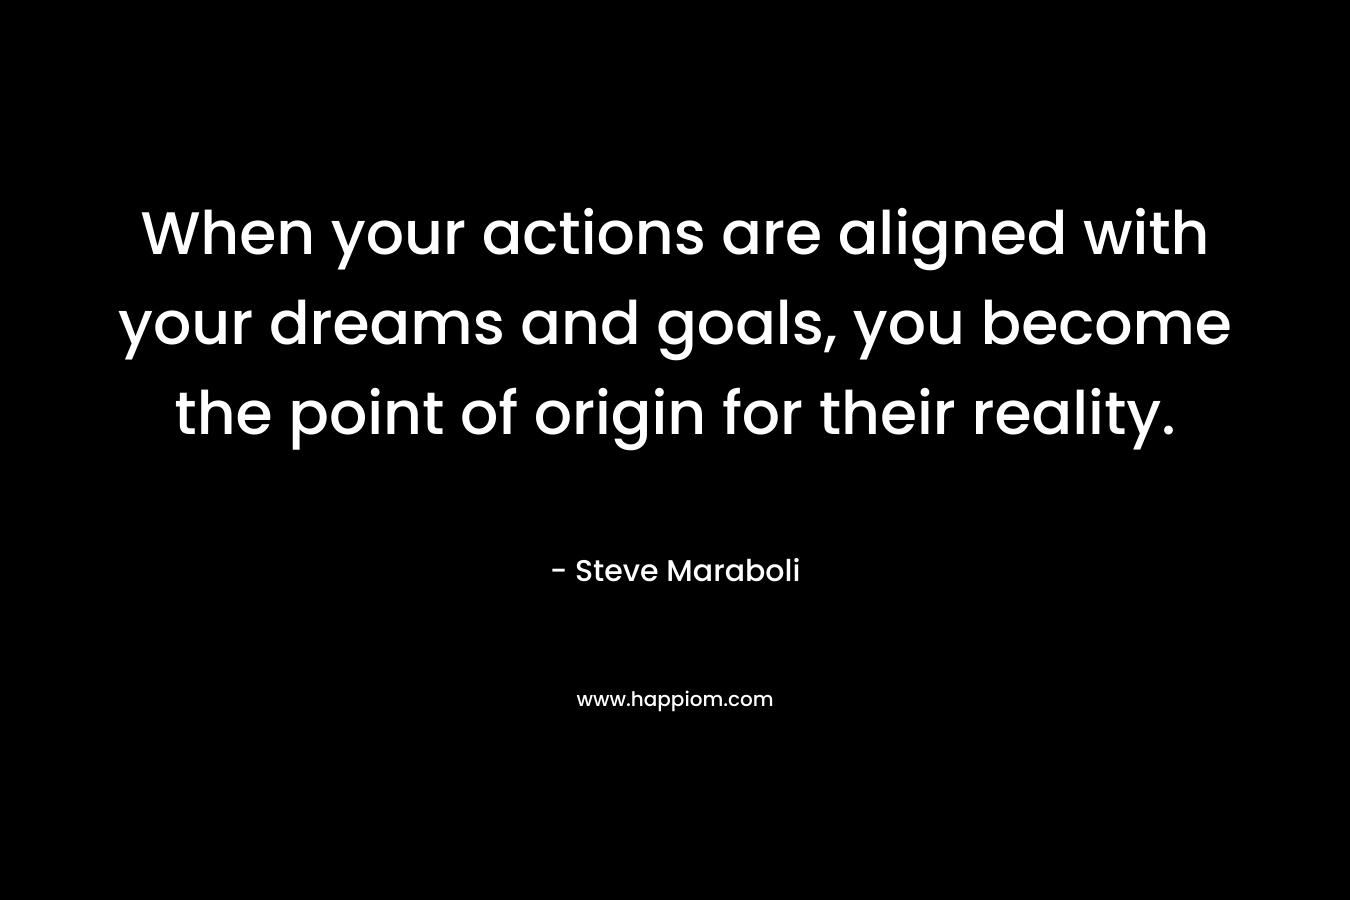 When your actions are aligned with your dreams and goals, you become the point of origin for their reality. – Steve Maraboli